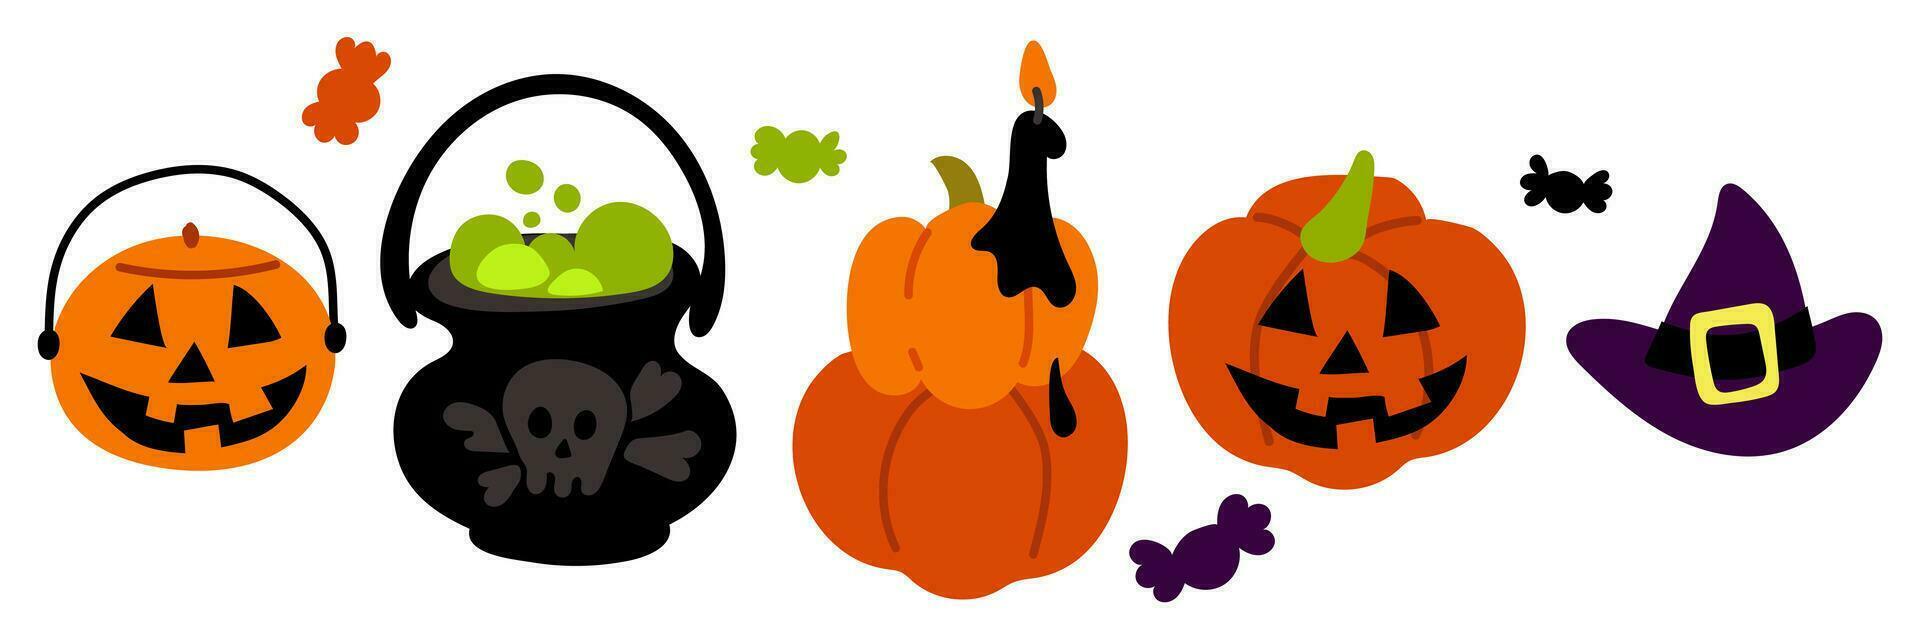 A set of elements for a happy Halloween day with a vector background. Cute collection of creepy pumpkins, cauldron, candy, faces, witch hat, candle. Charming elements for Halloween festival decoration